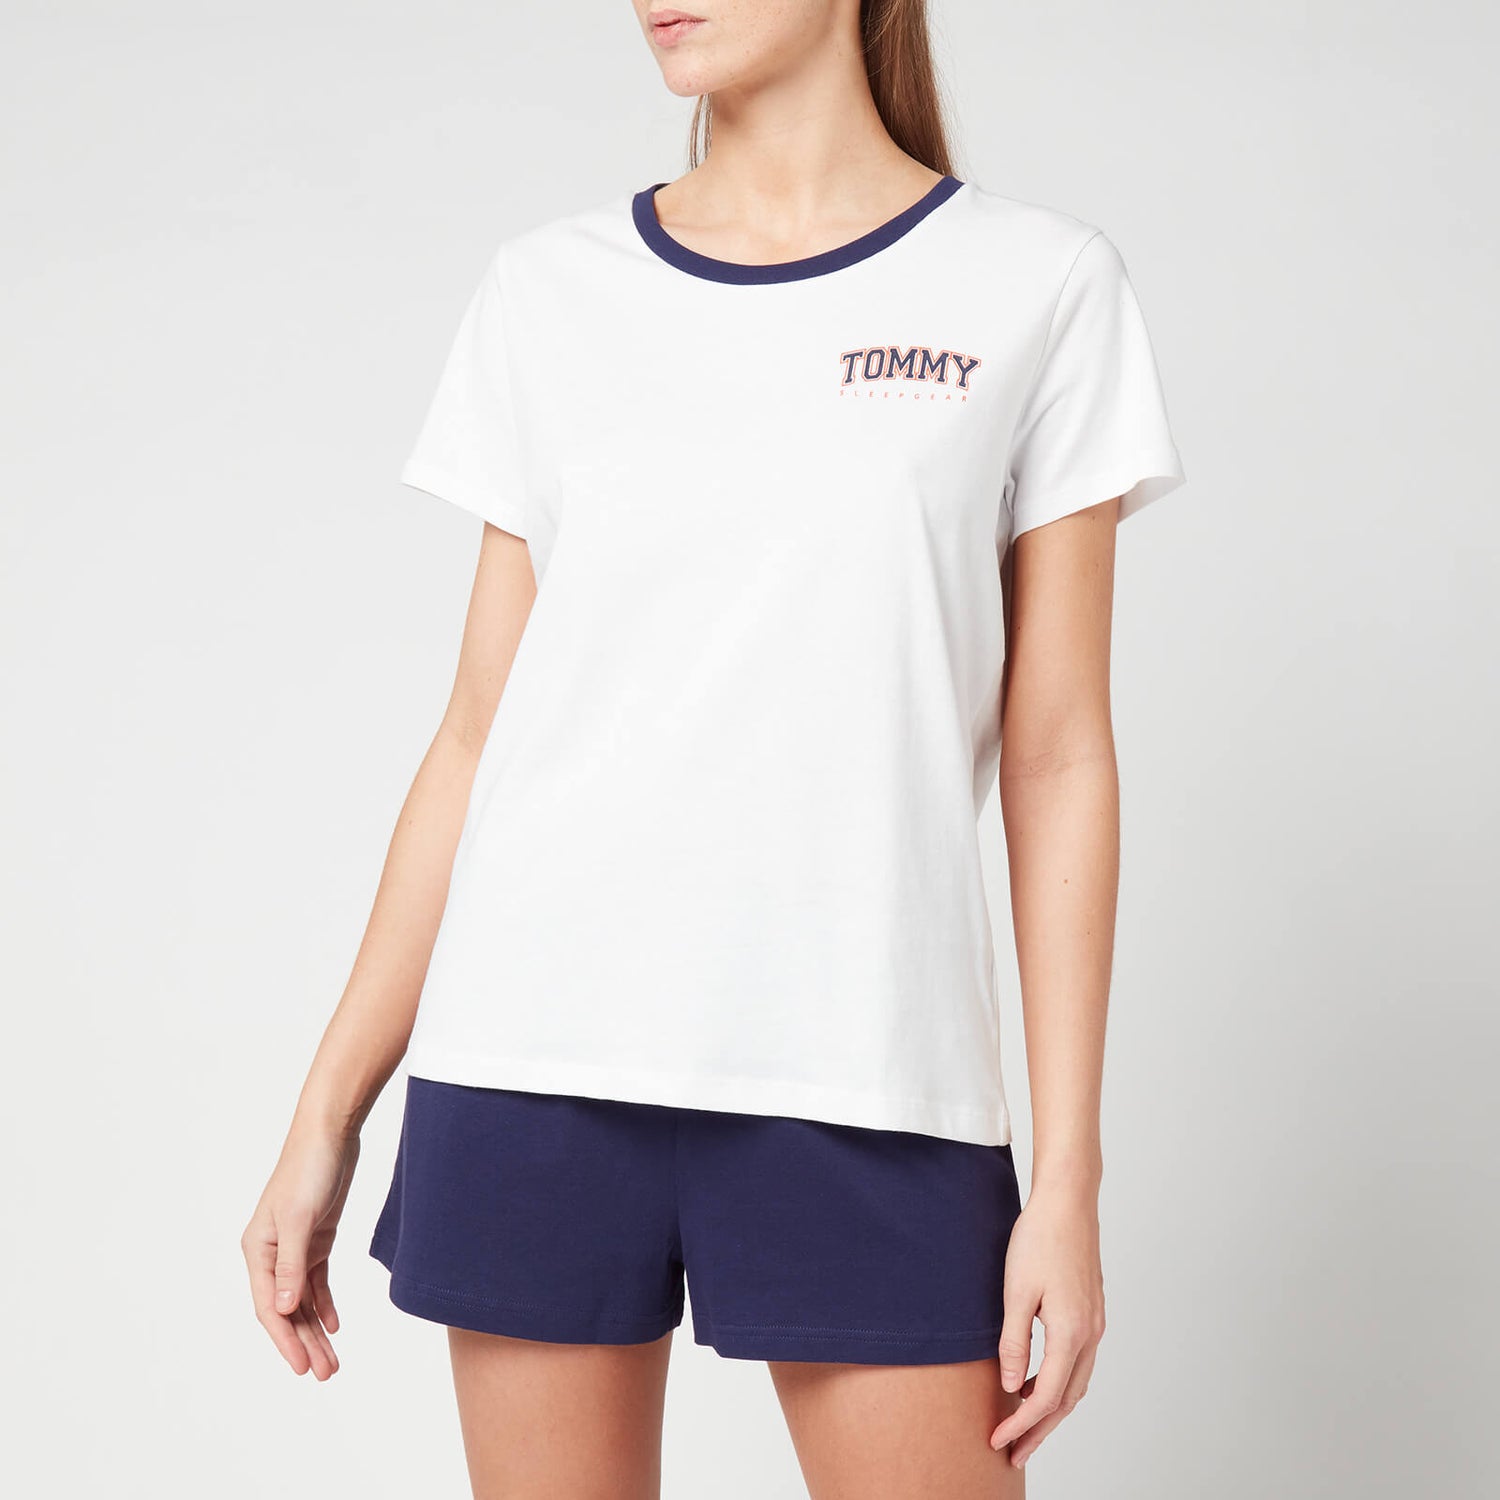 Tommy Hilfiger Women's Sustainable T-Shirt And Shorts Set - White/Yale Navy - XS